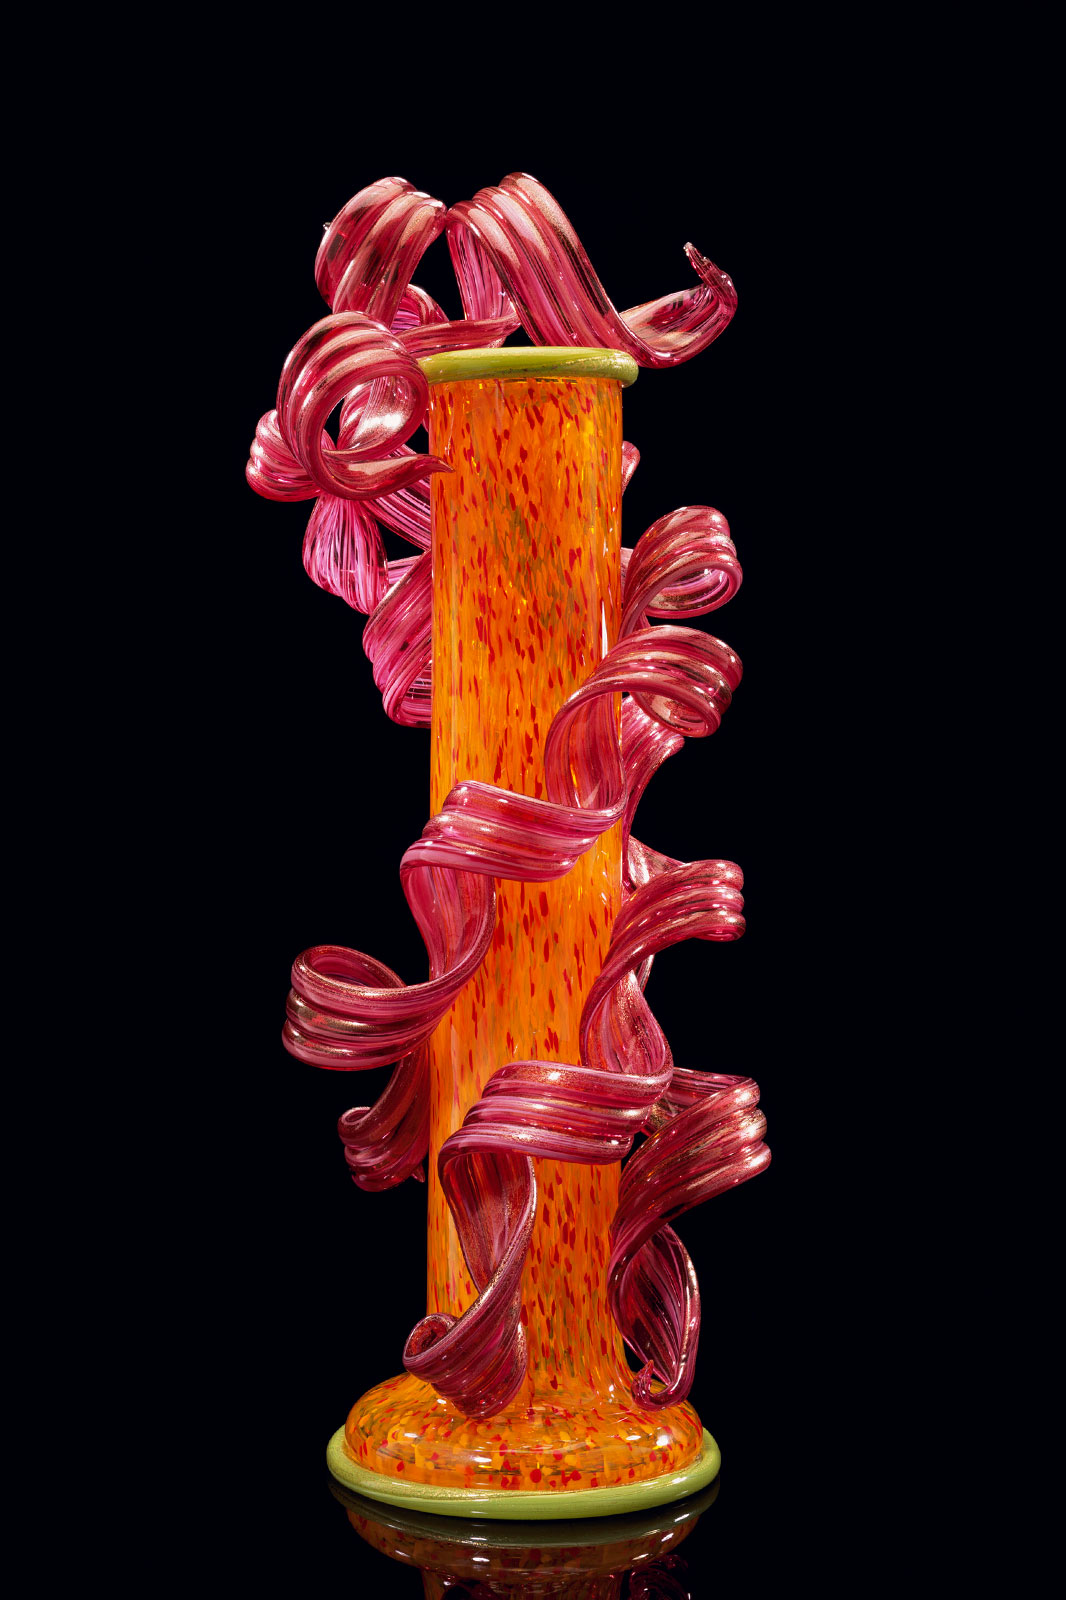 Marigold Venetian with Pink Clover Coils, 2002 by Dale Chihuly